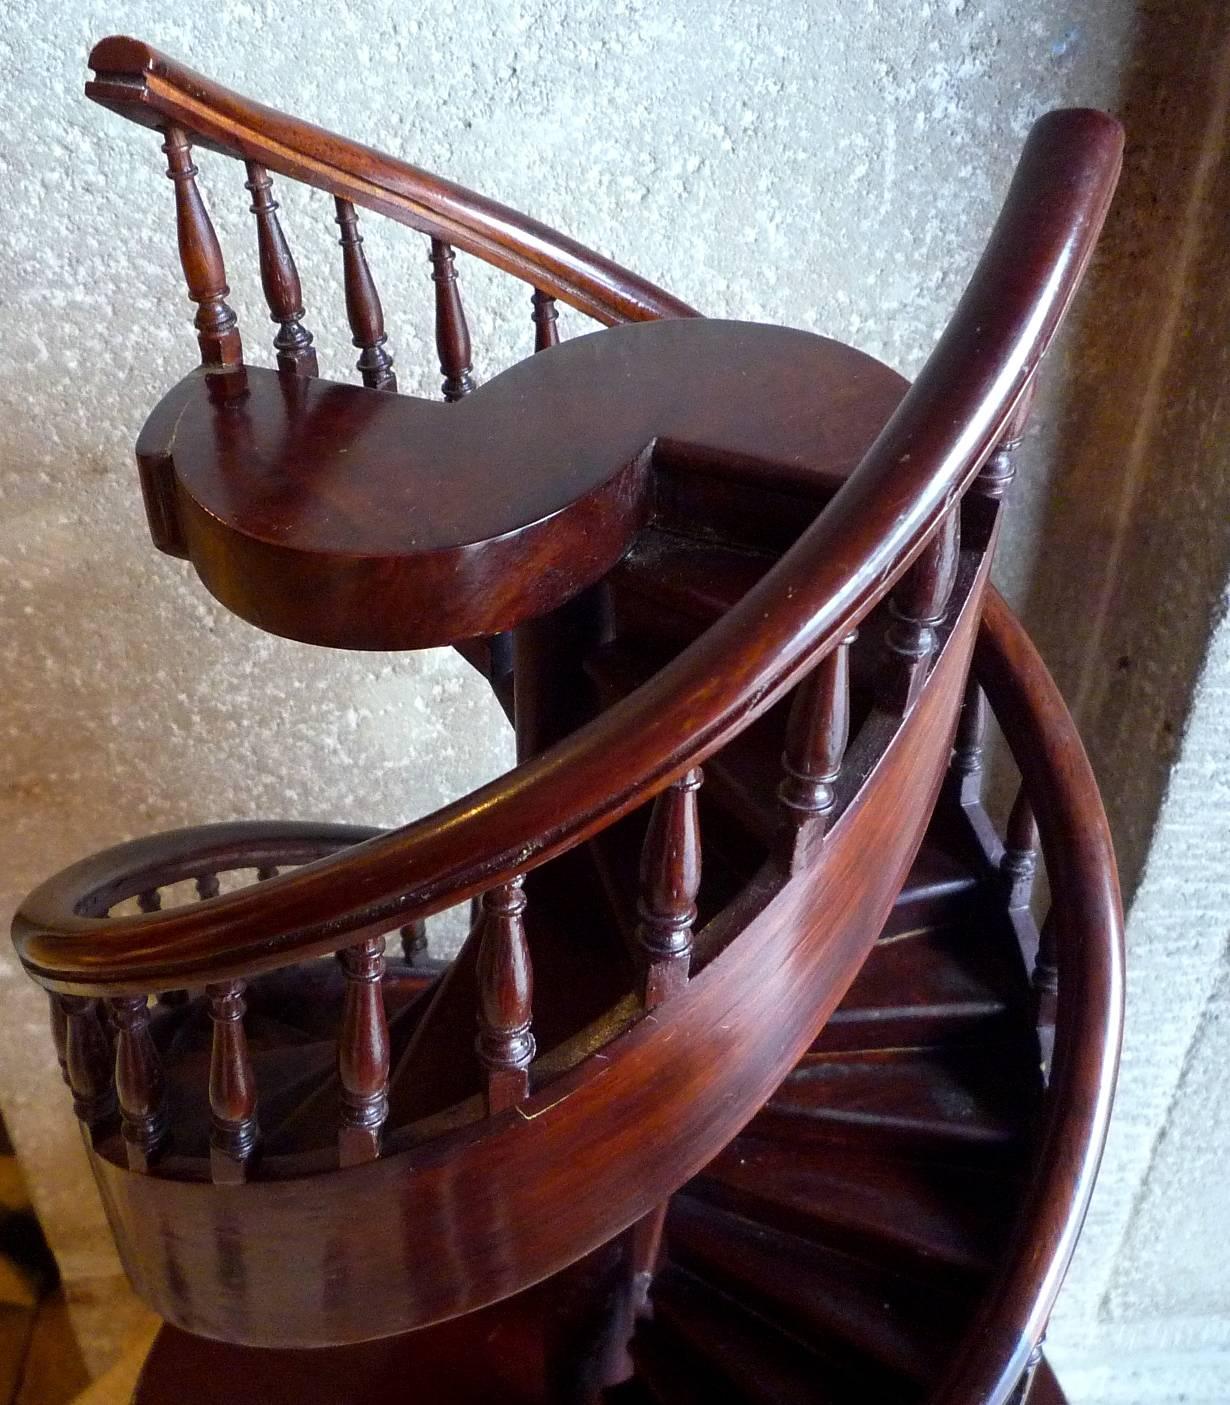 Late 19th Century French Mahogany Miniature Double Spiral Staircase, Model by a Craftsman, 1876